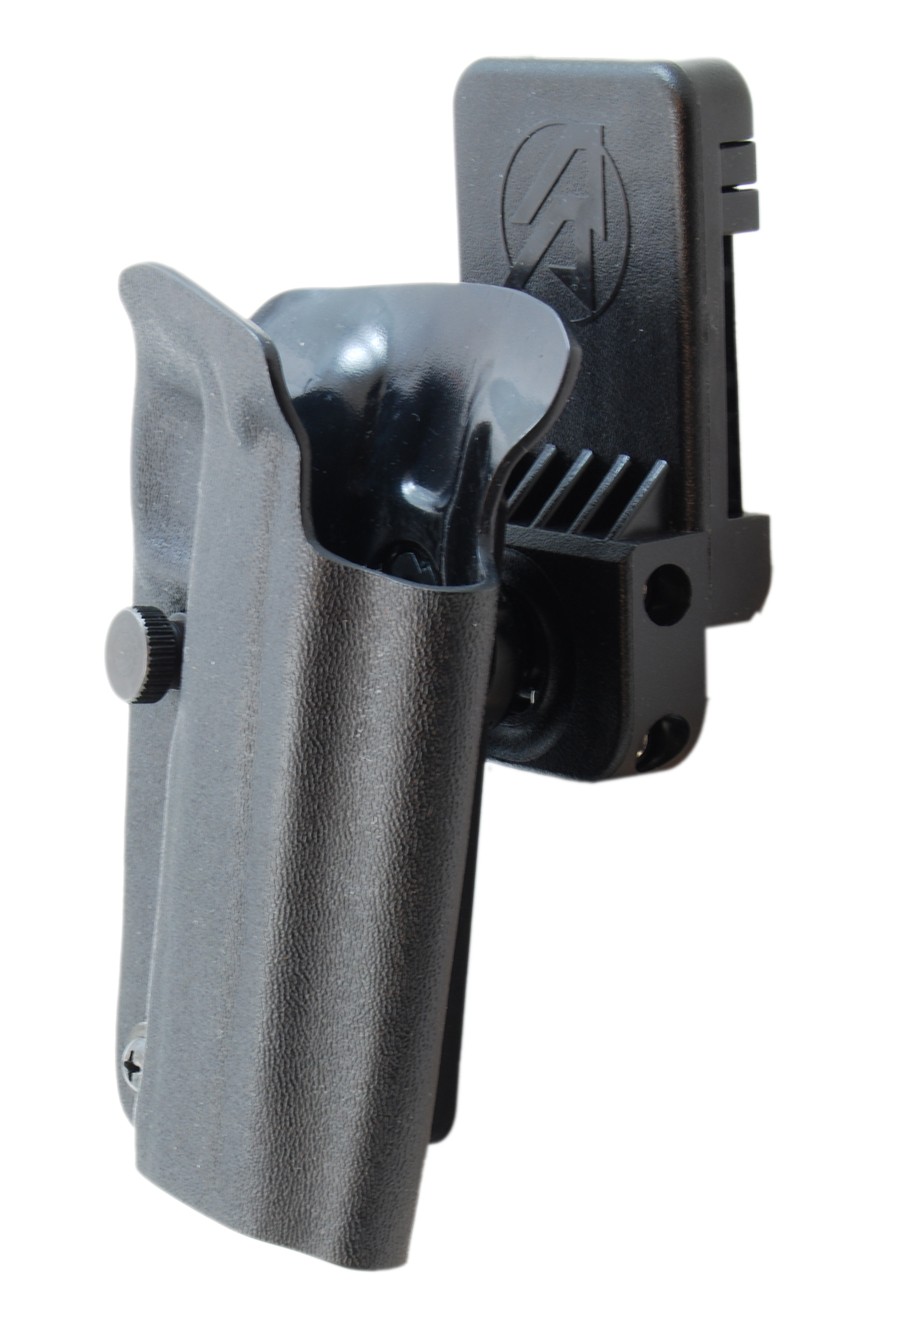 DAA PDR Pro II Holster Clearance Models